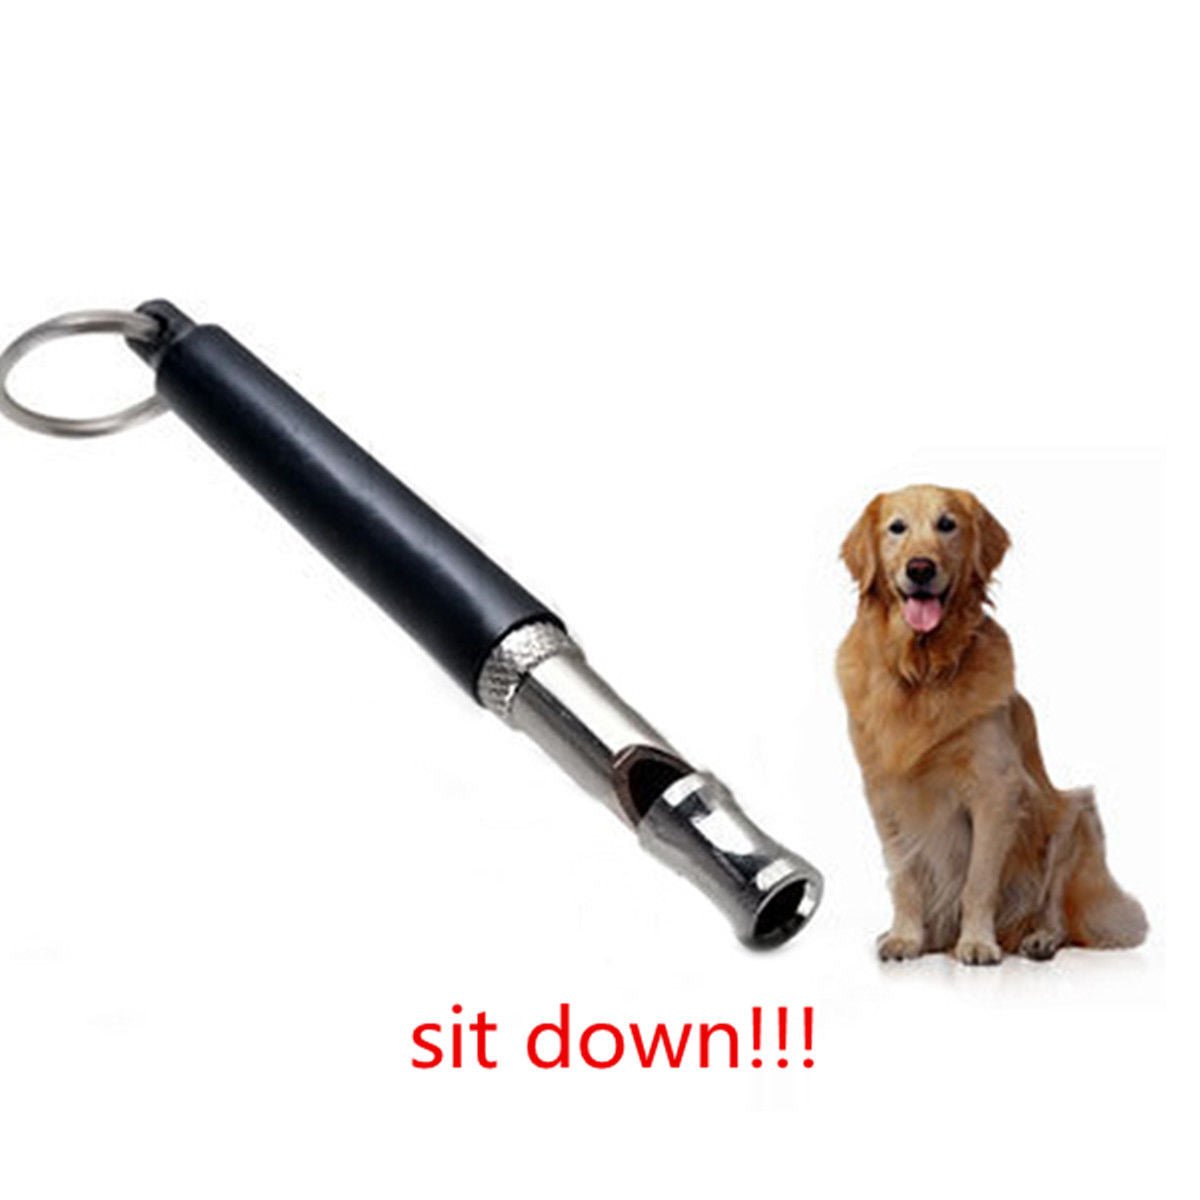 UltraSonic Dog Training Whistle - Abound Pet Supplies